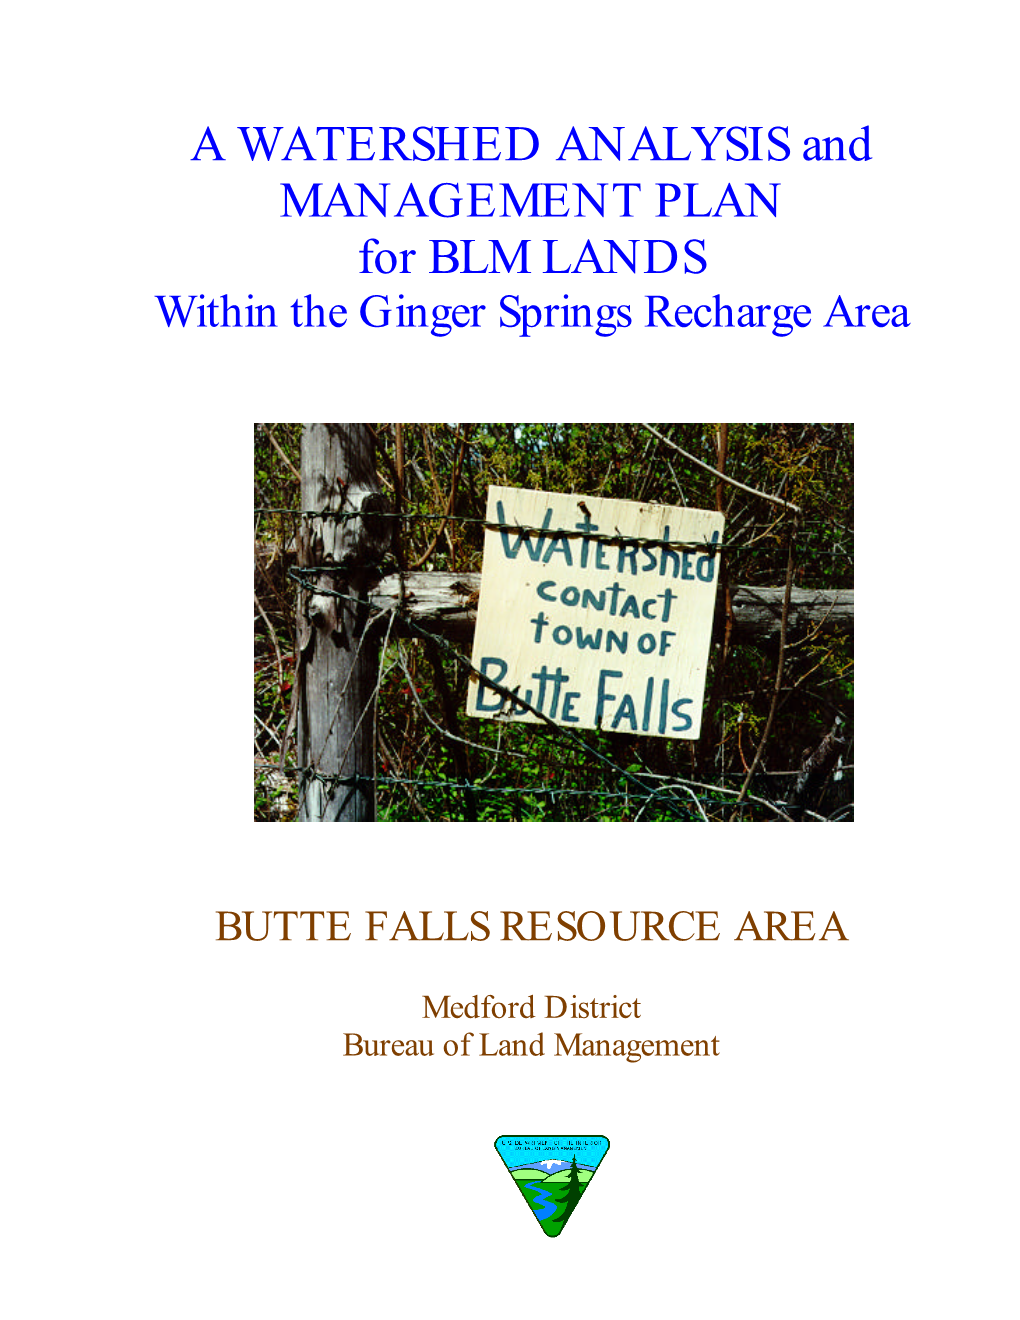 A WATERSHED ANALYSIS and MANAGEMENT PLAN for BLM LANDS Within the Ginger Springs Recharge Area